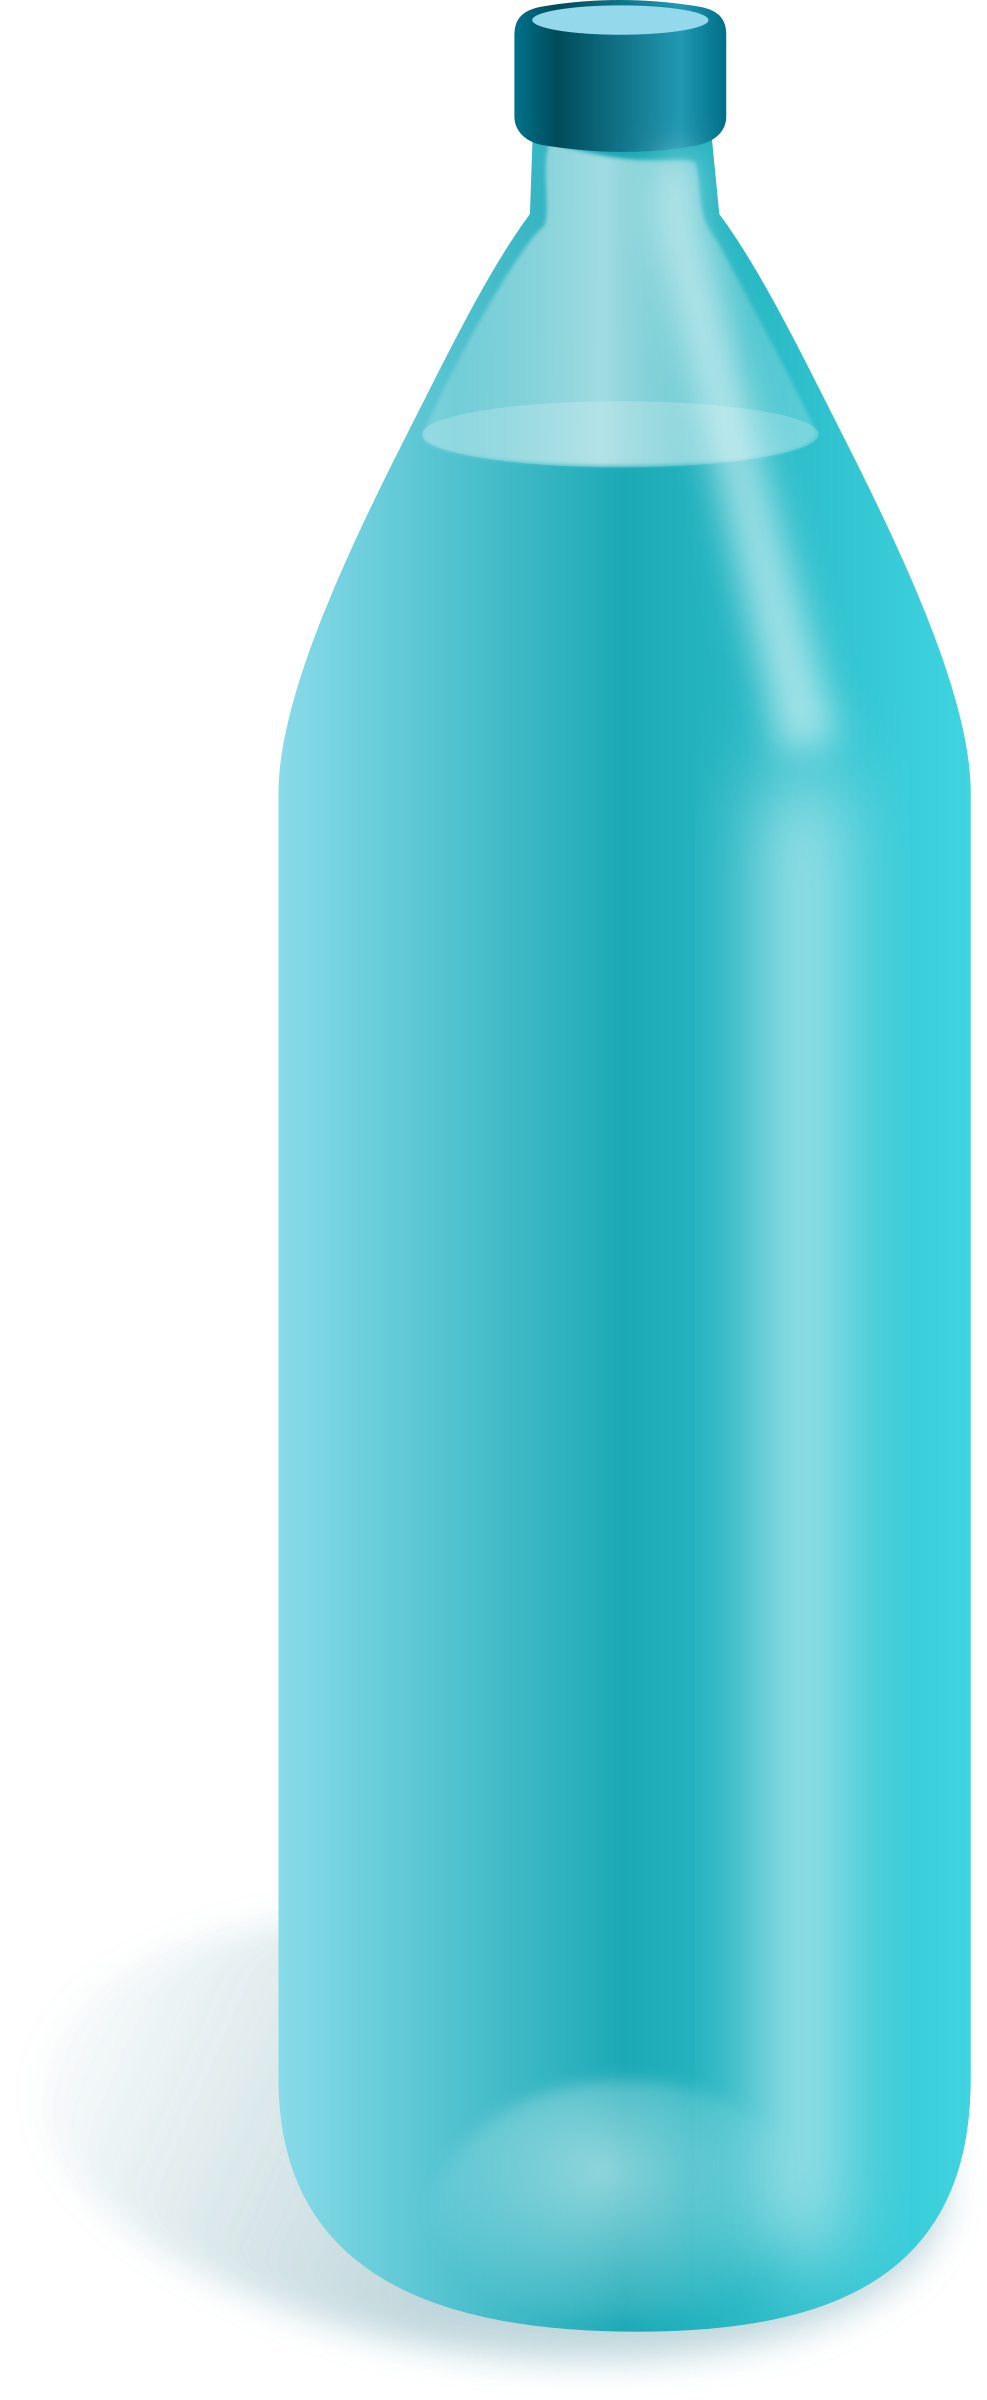 Water bottle PNG image free download 